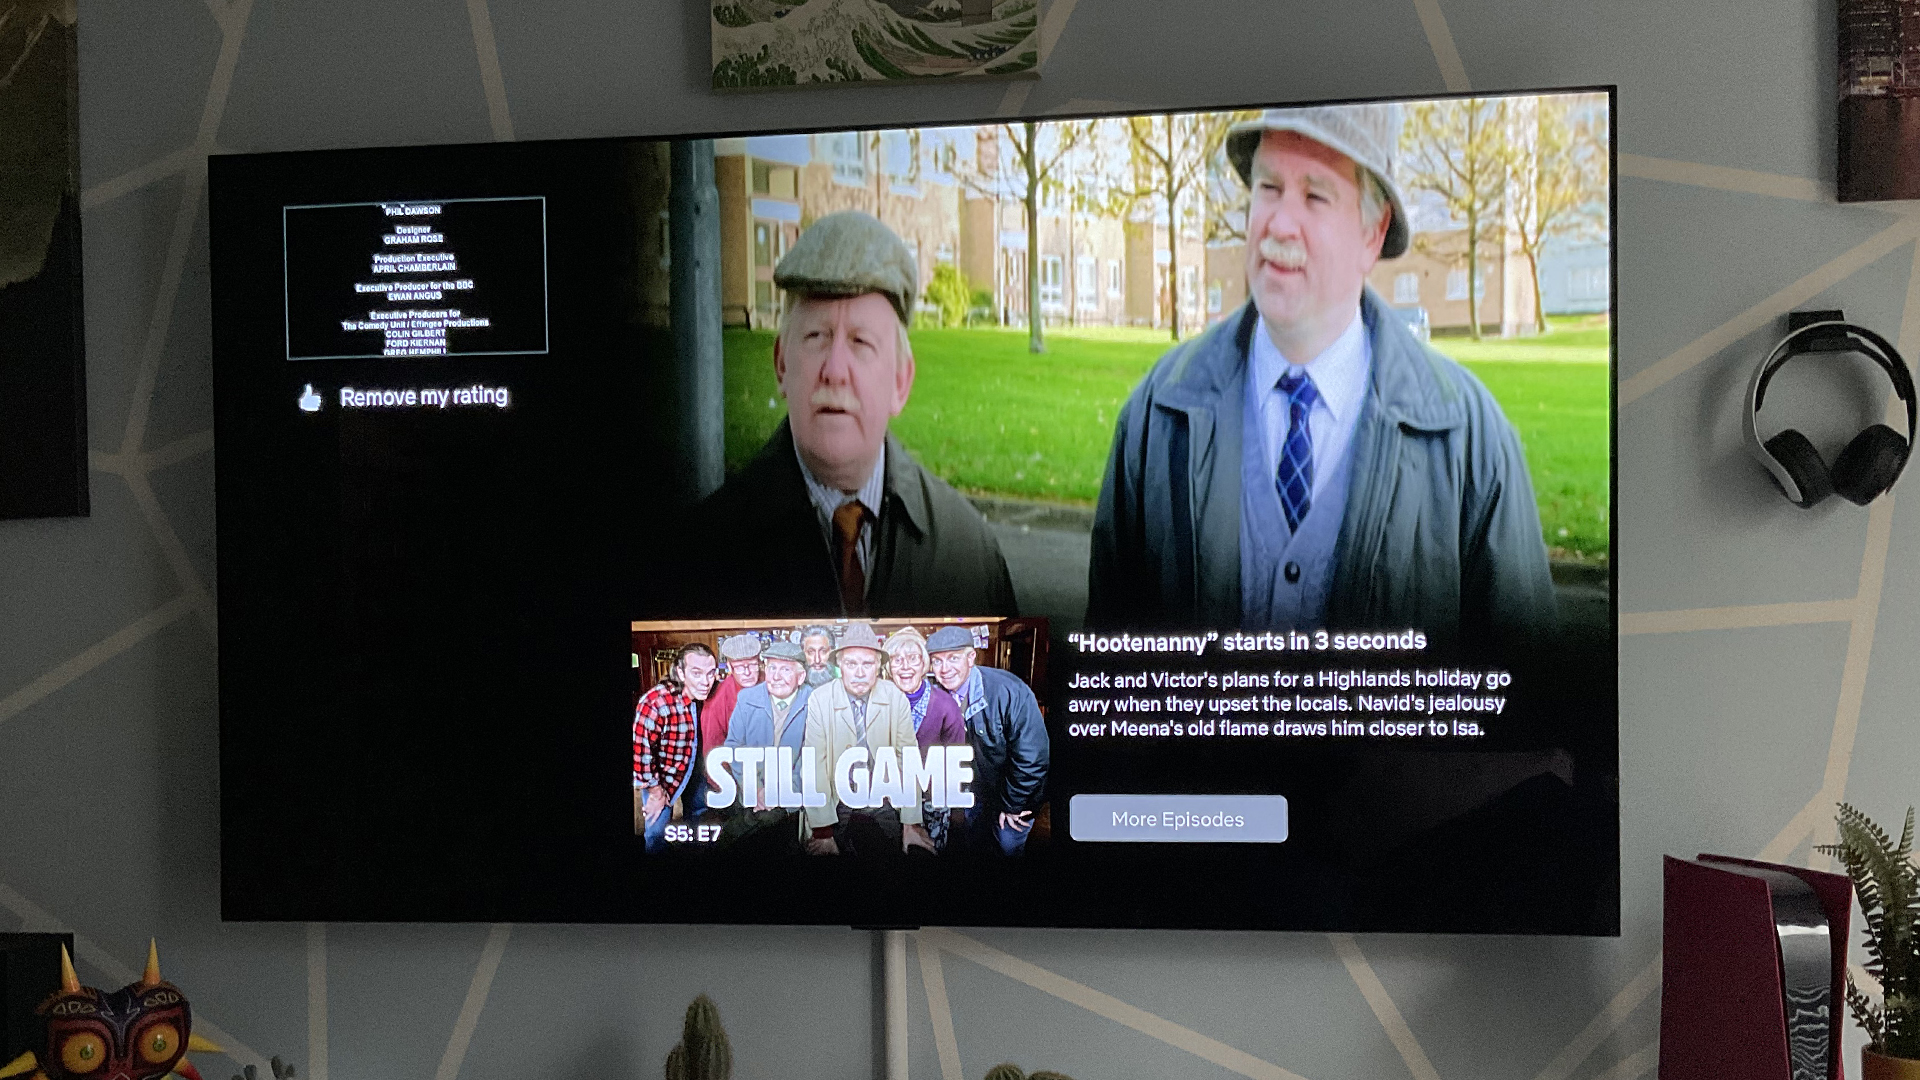 Netflix's auto-play function takes place on OLED TV with Still Game